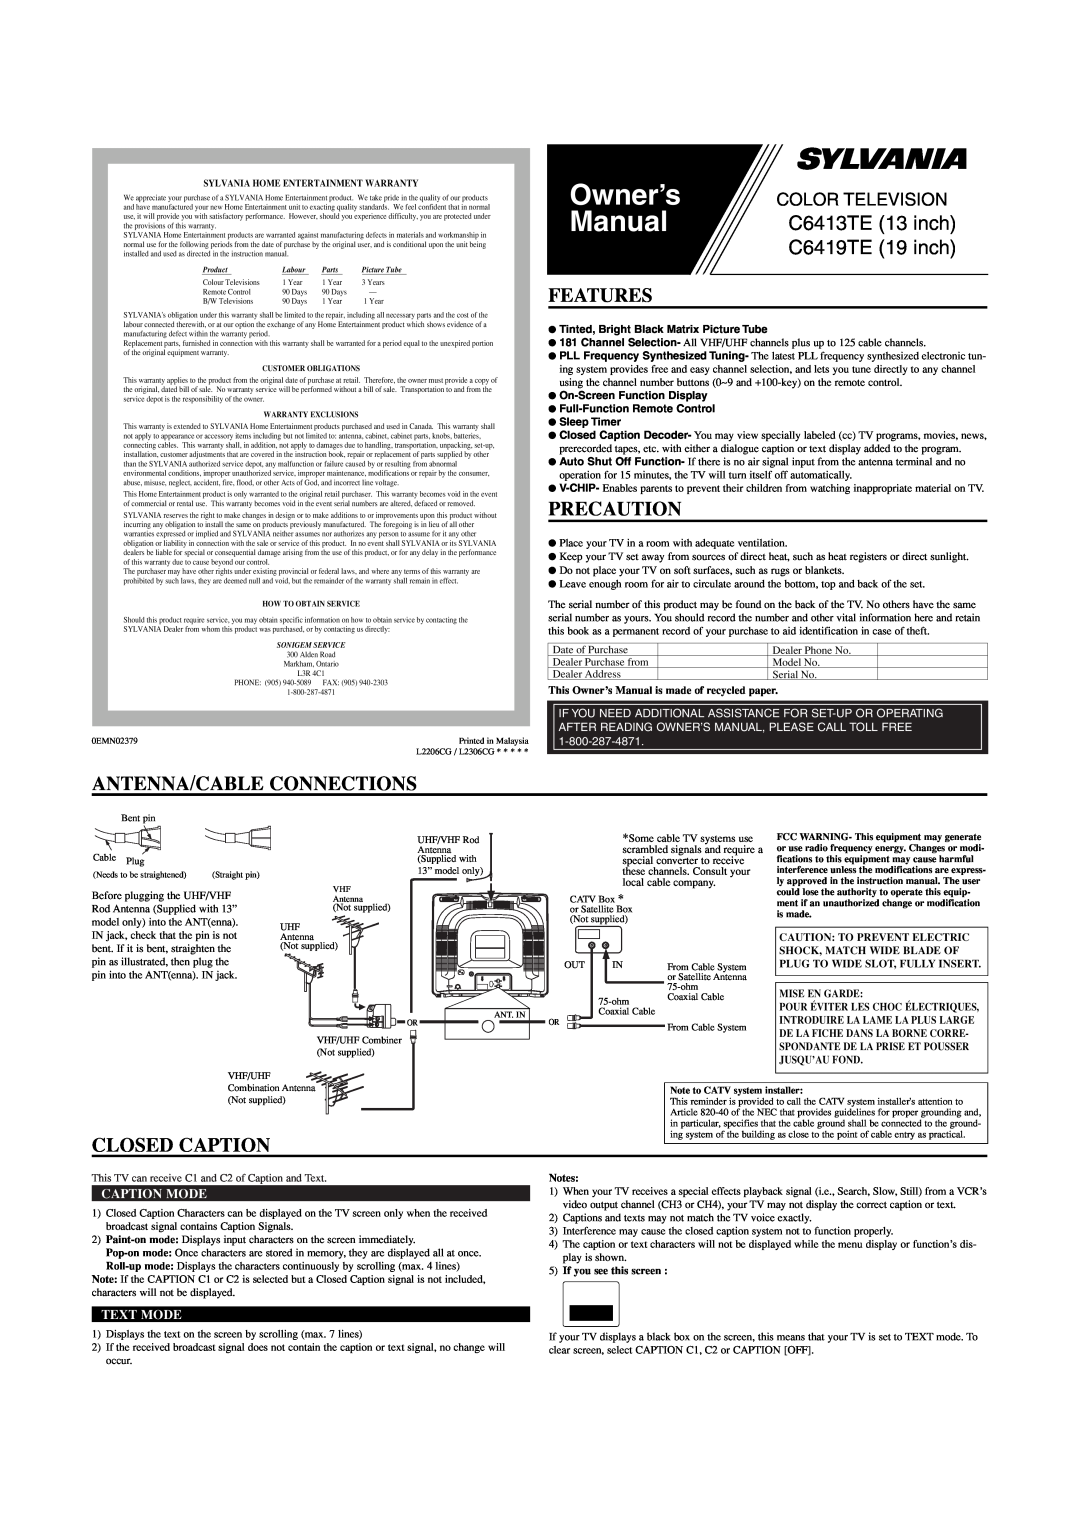 Sylvania C6413TE, C5419TE owner manual Owner’s, Manual, Features, Precaution, Antenna/Cable Connections, Closed Caption 